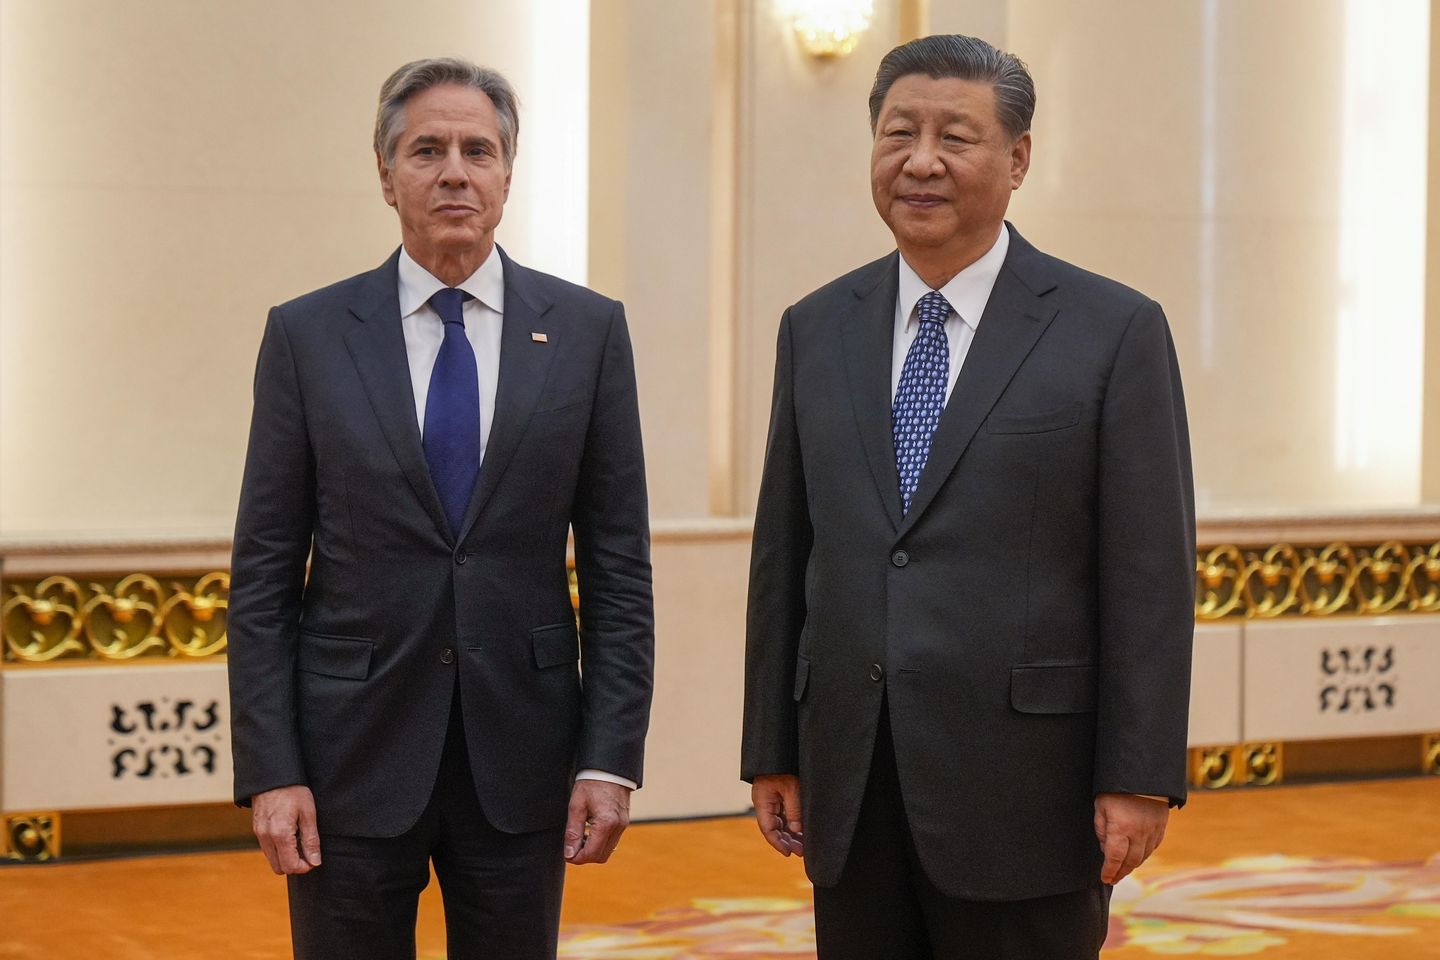 Blinken meets with Chinese President Xi as U.S., China spar over bilateral and global issues